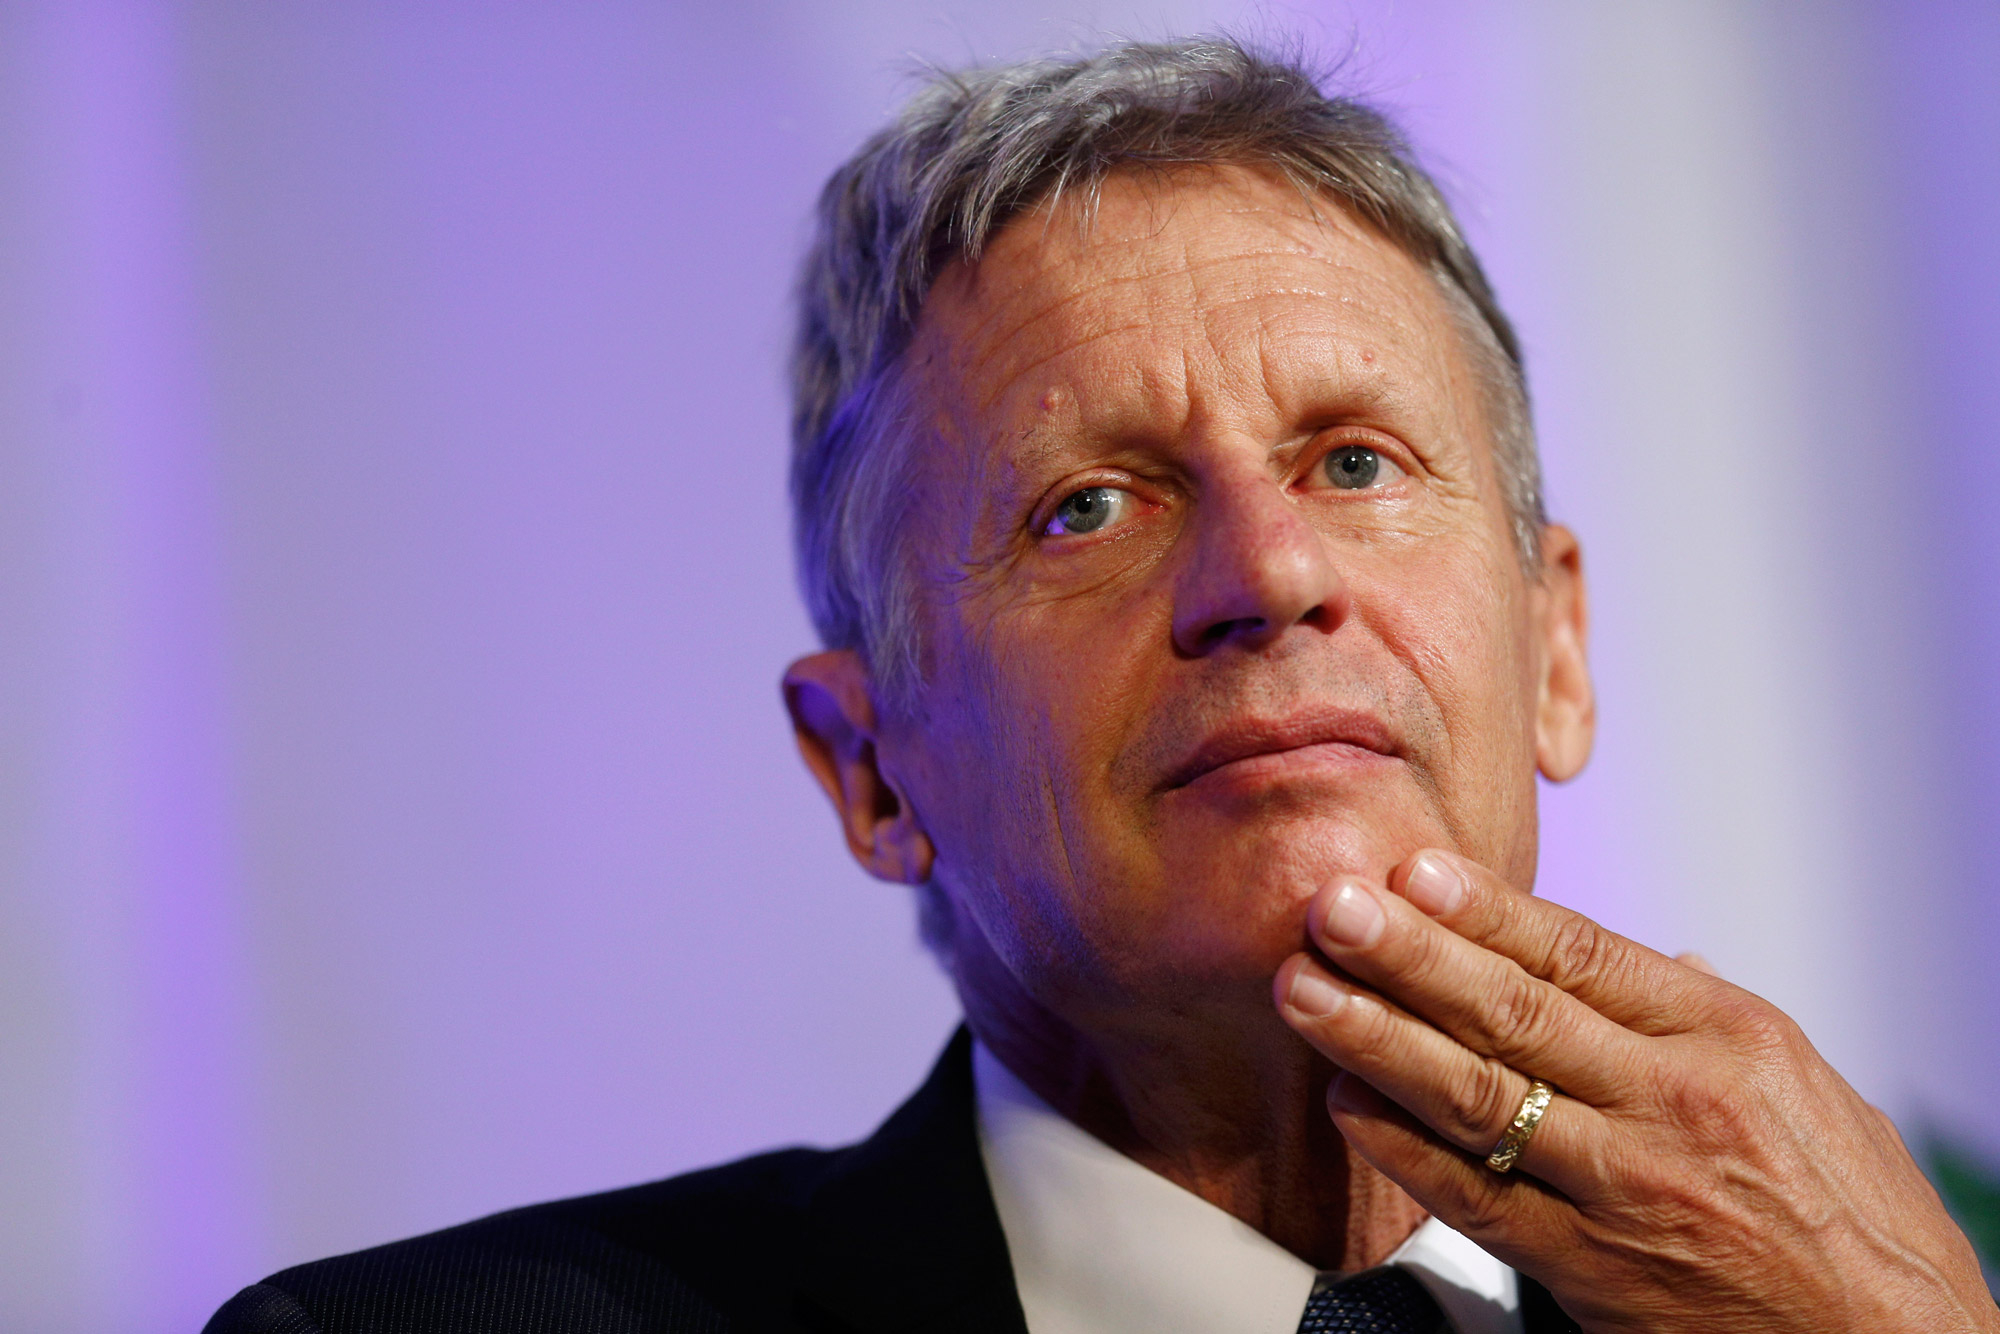 Get To Know Gary Johnson: The Man Behind The Politics And Controversy